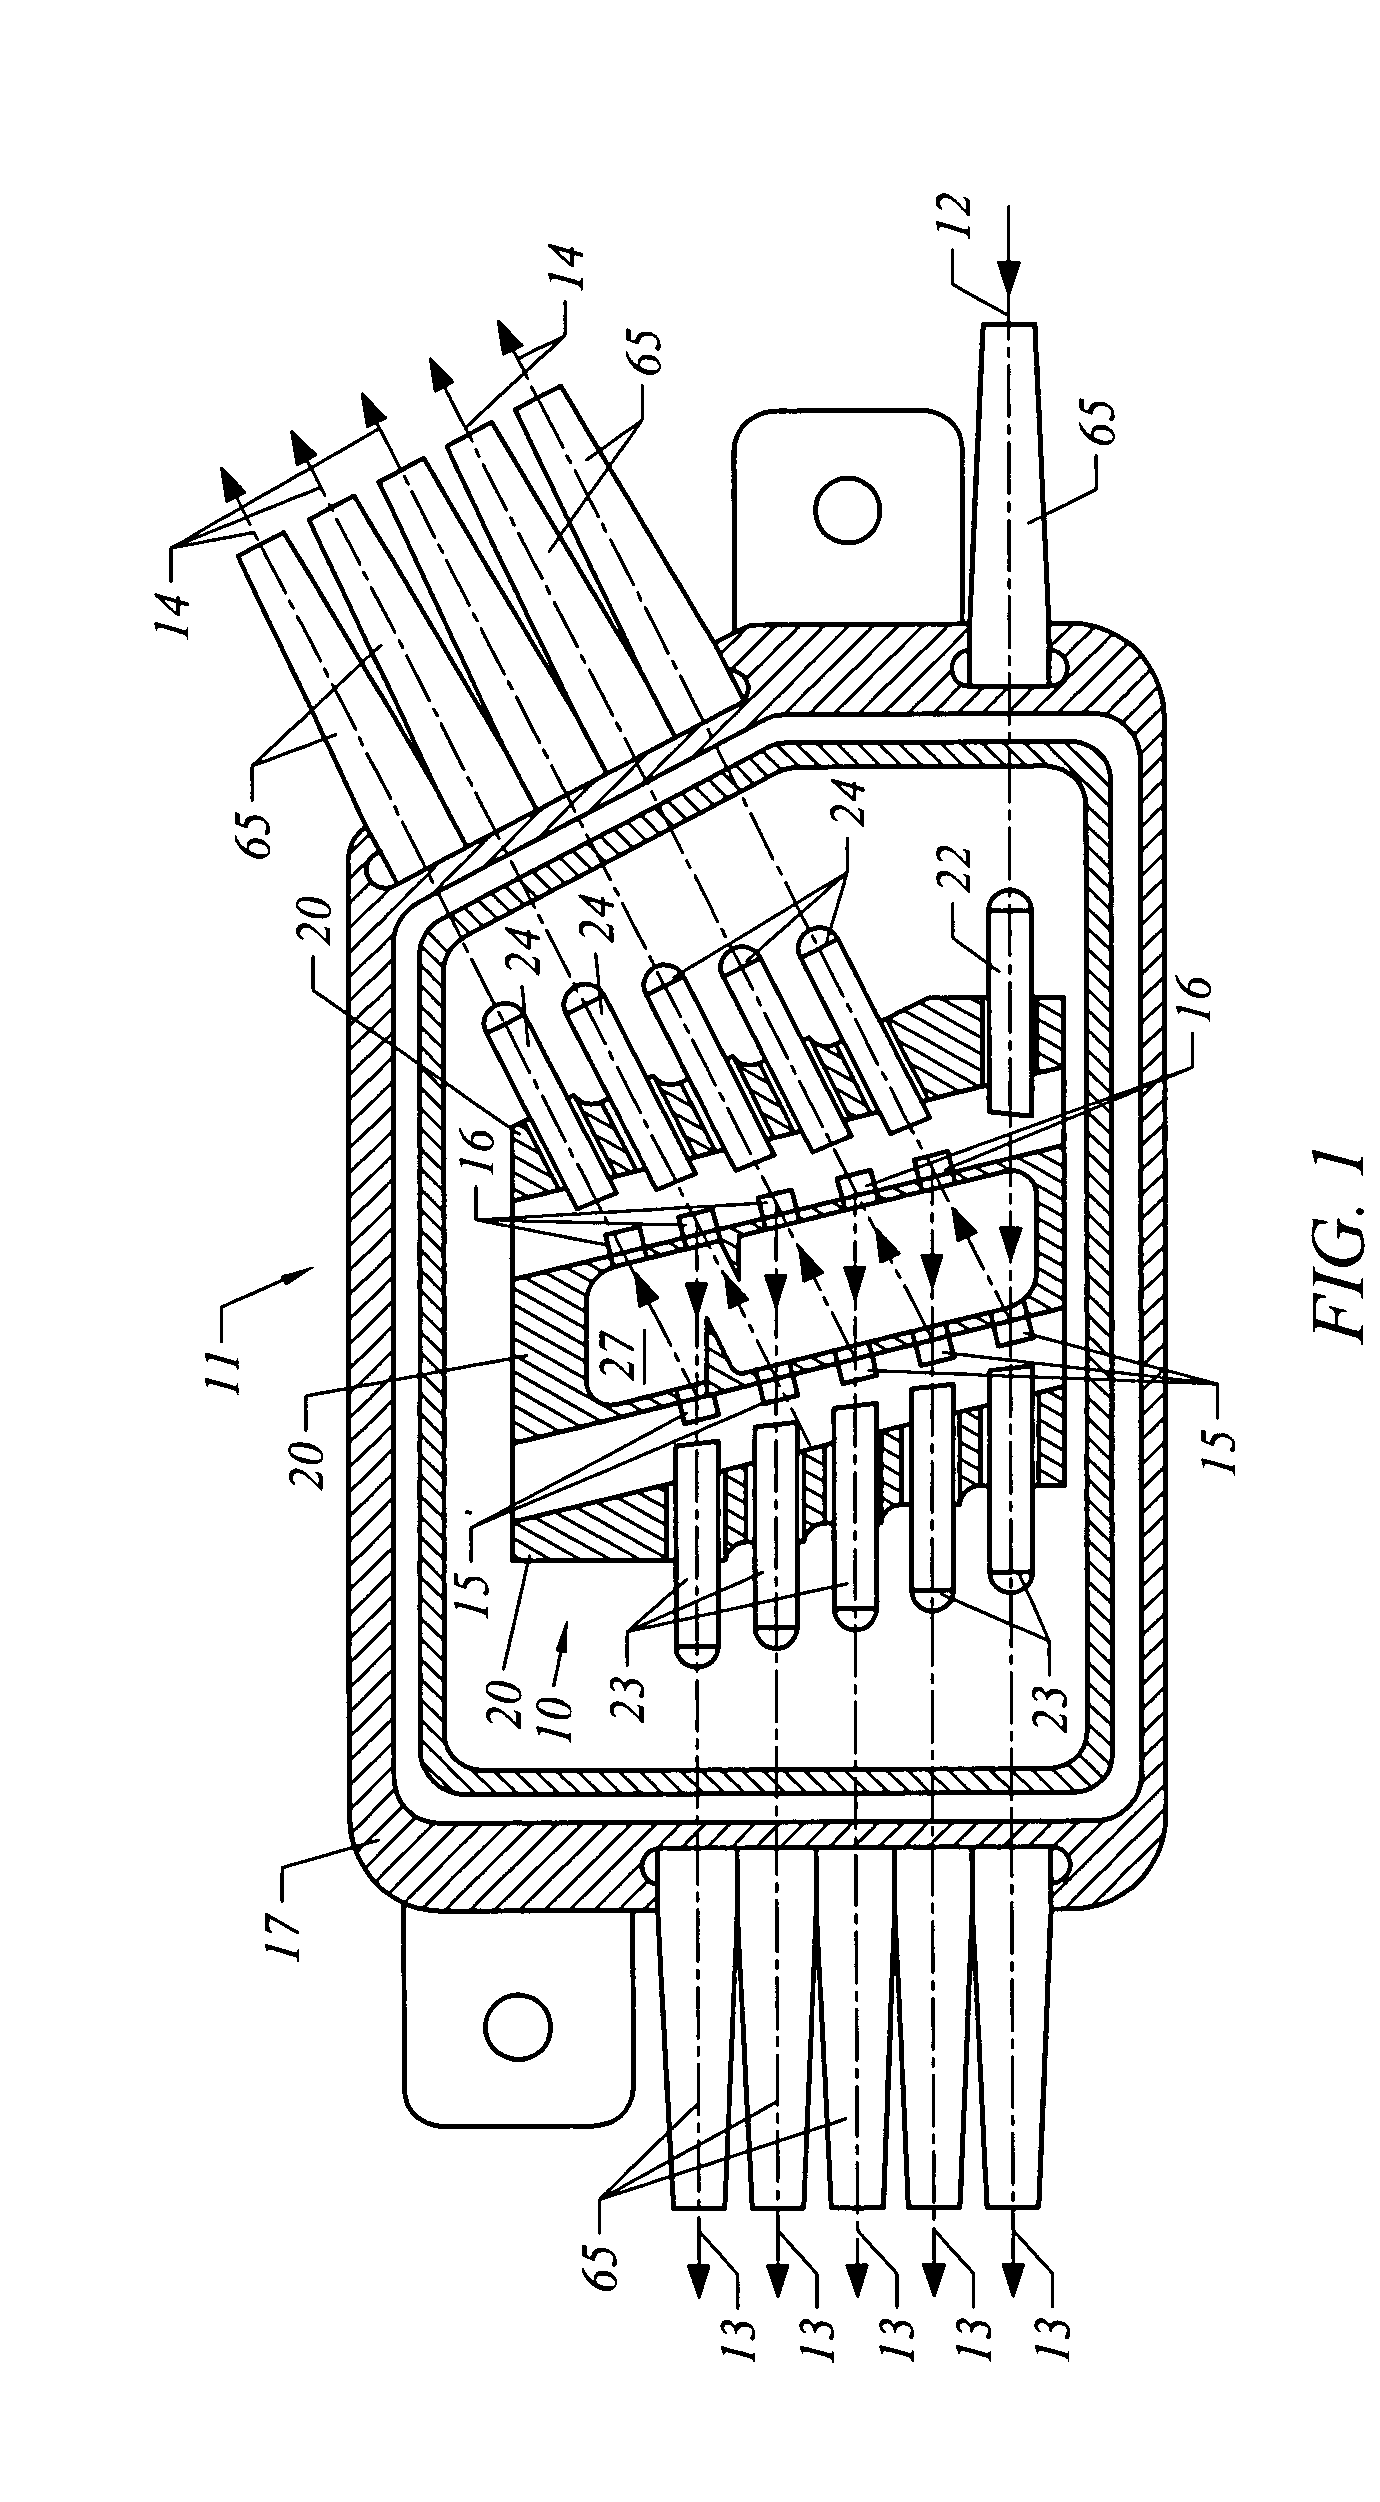 Miniature WDM add/drop multiplexer and method of manufacture thereof